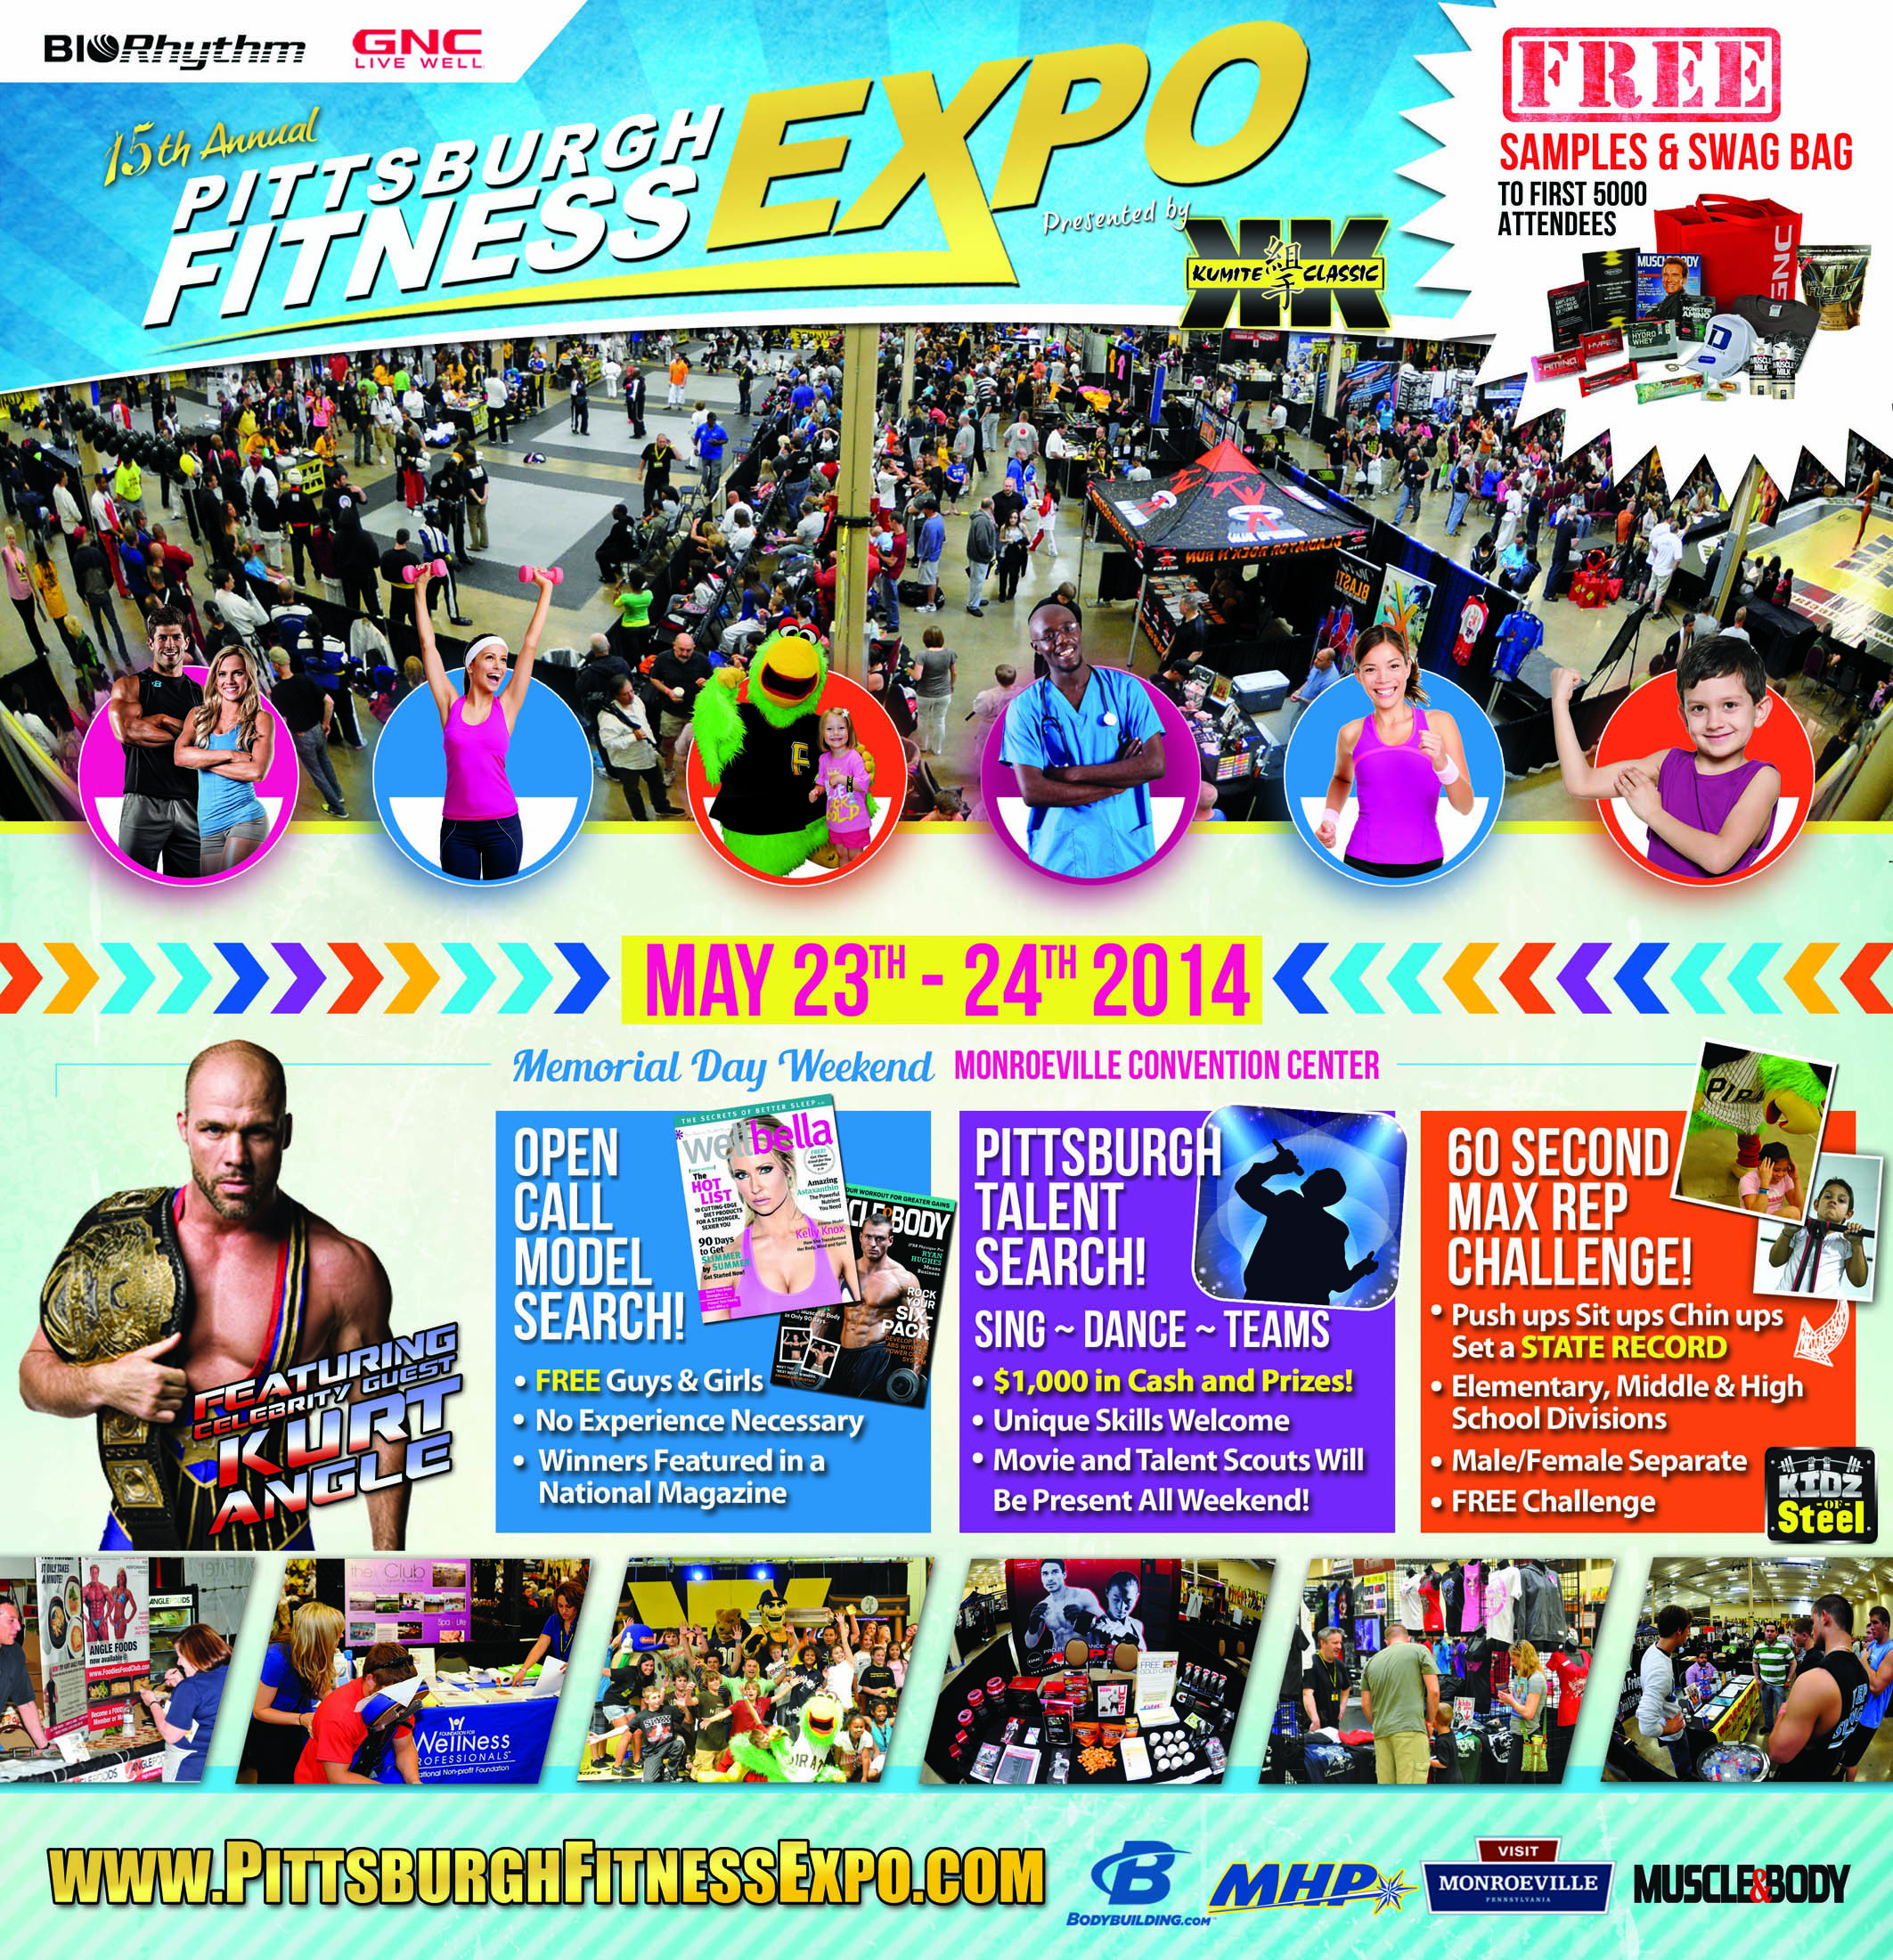 Pittsburgh Fitness Expo ad